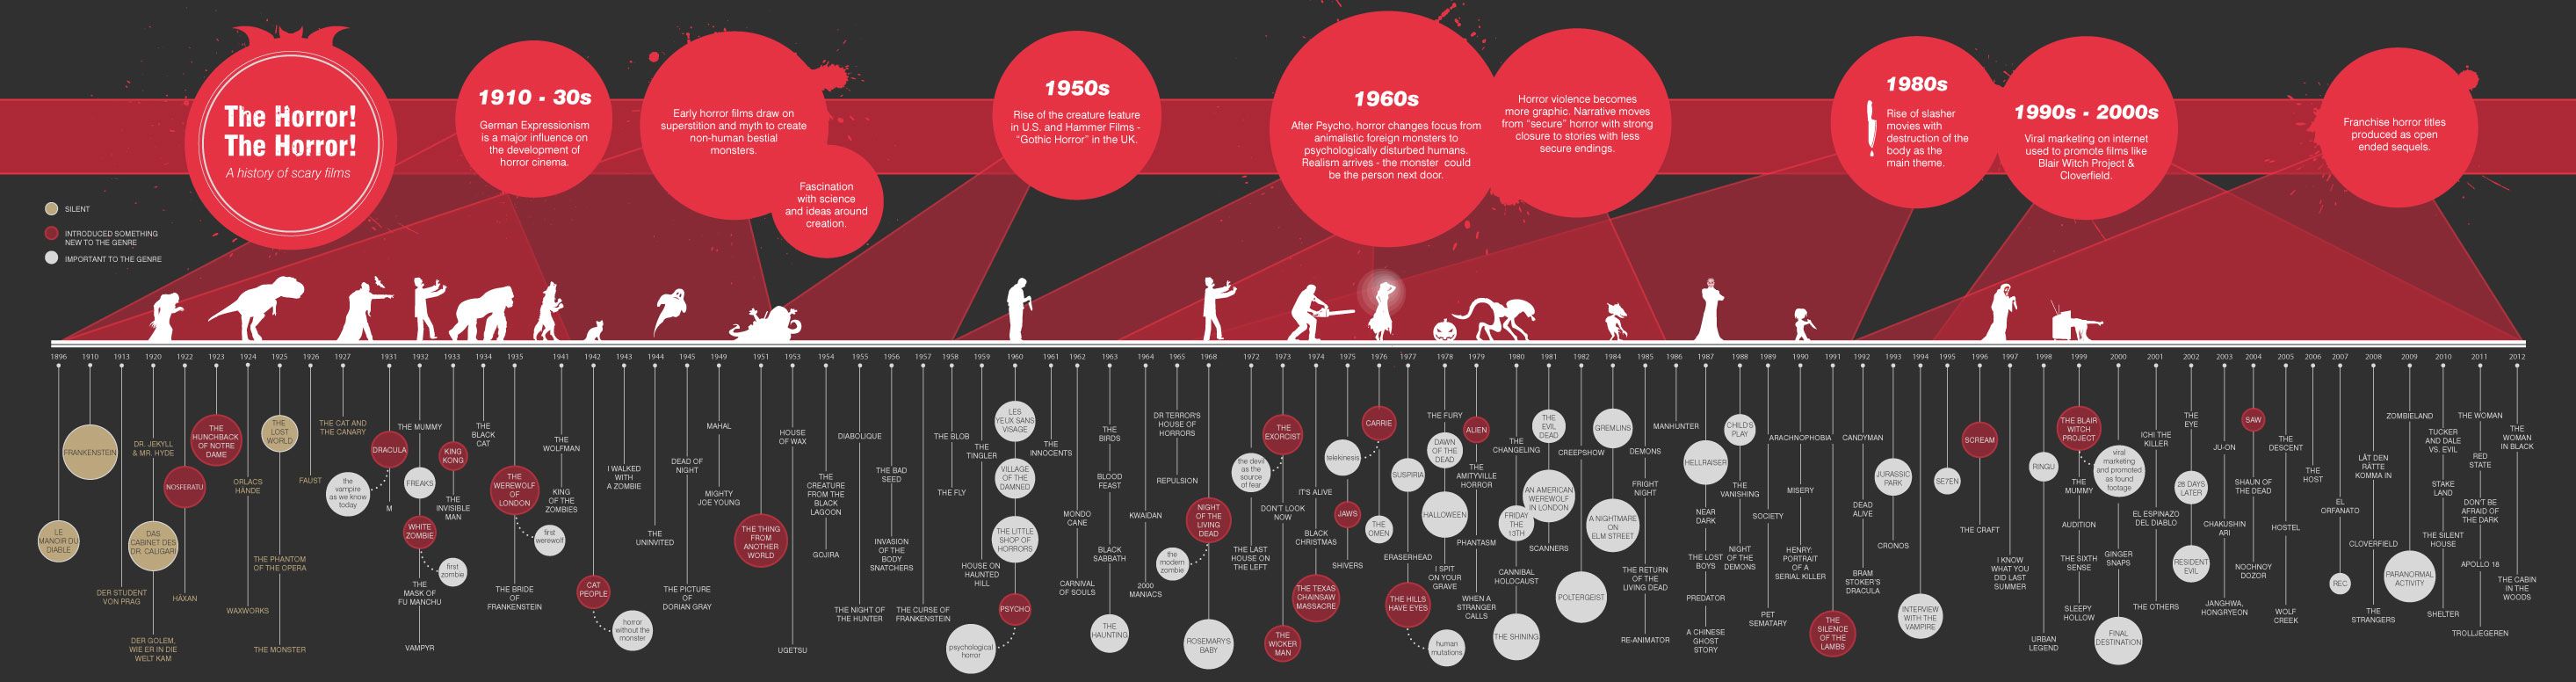 A Timeline of Hollywood Horror Movies